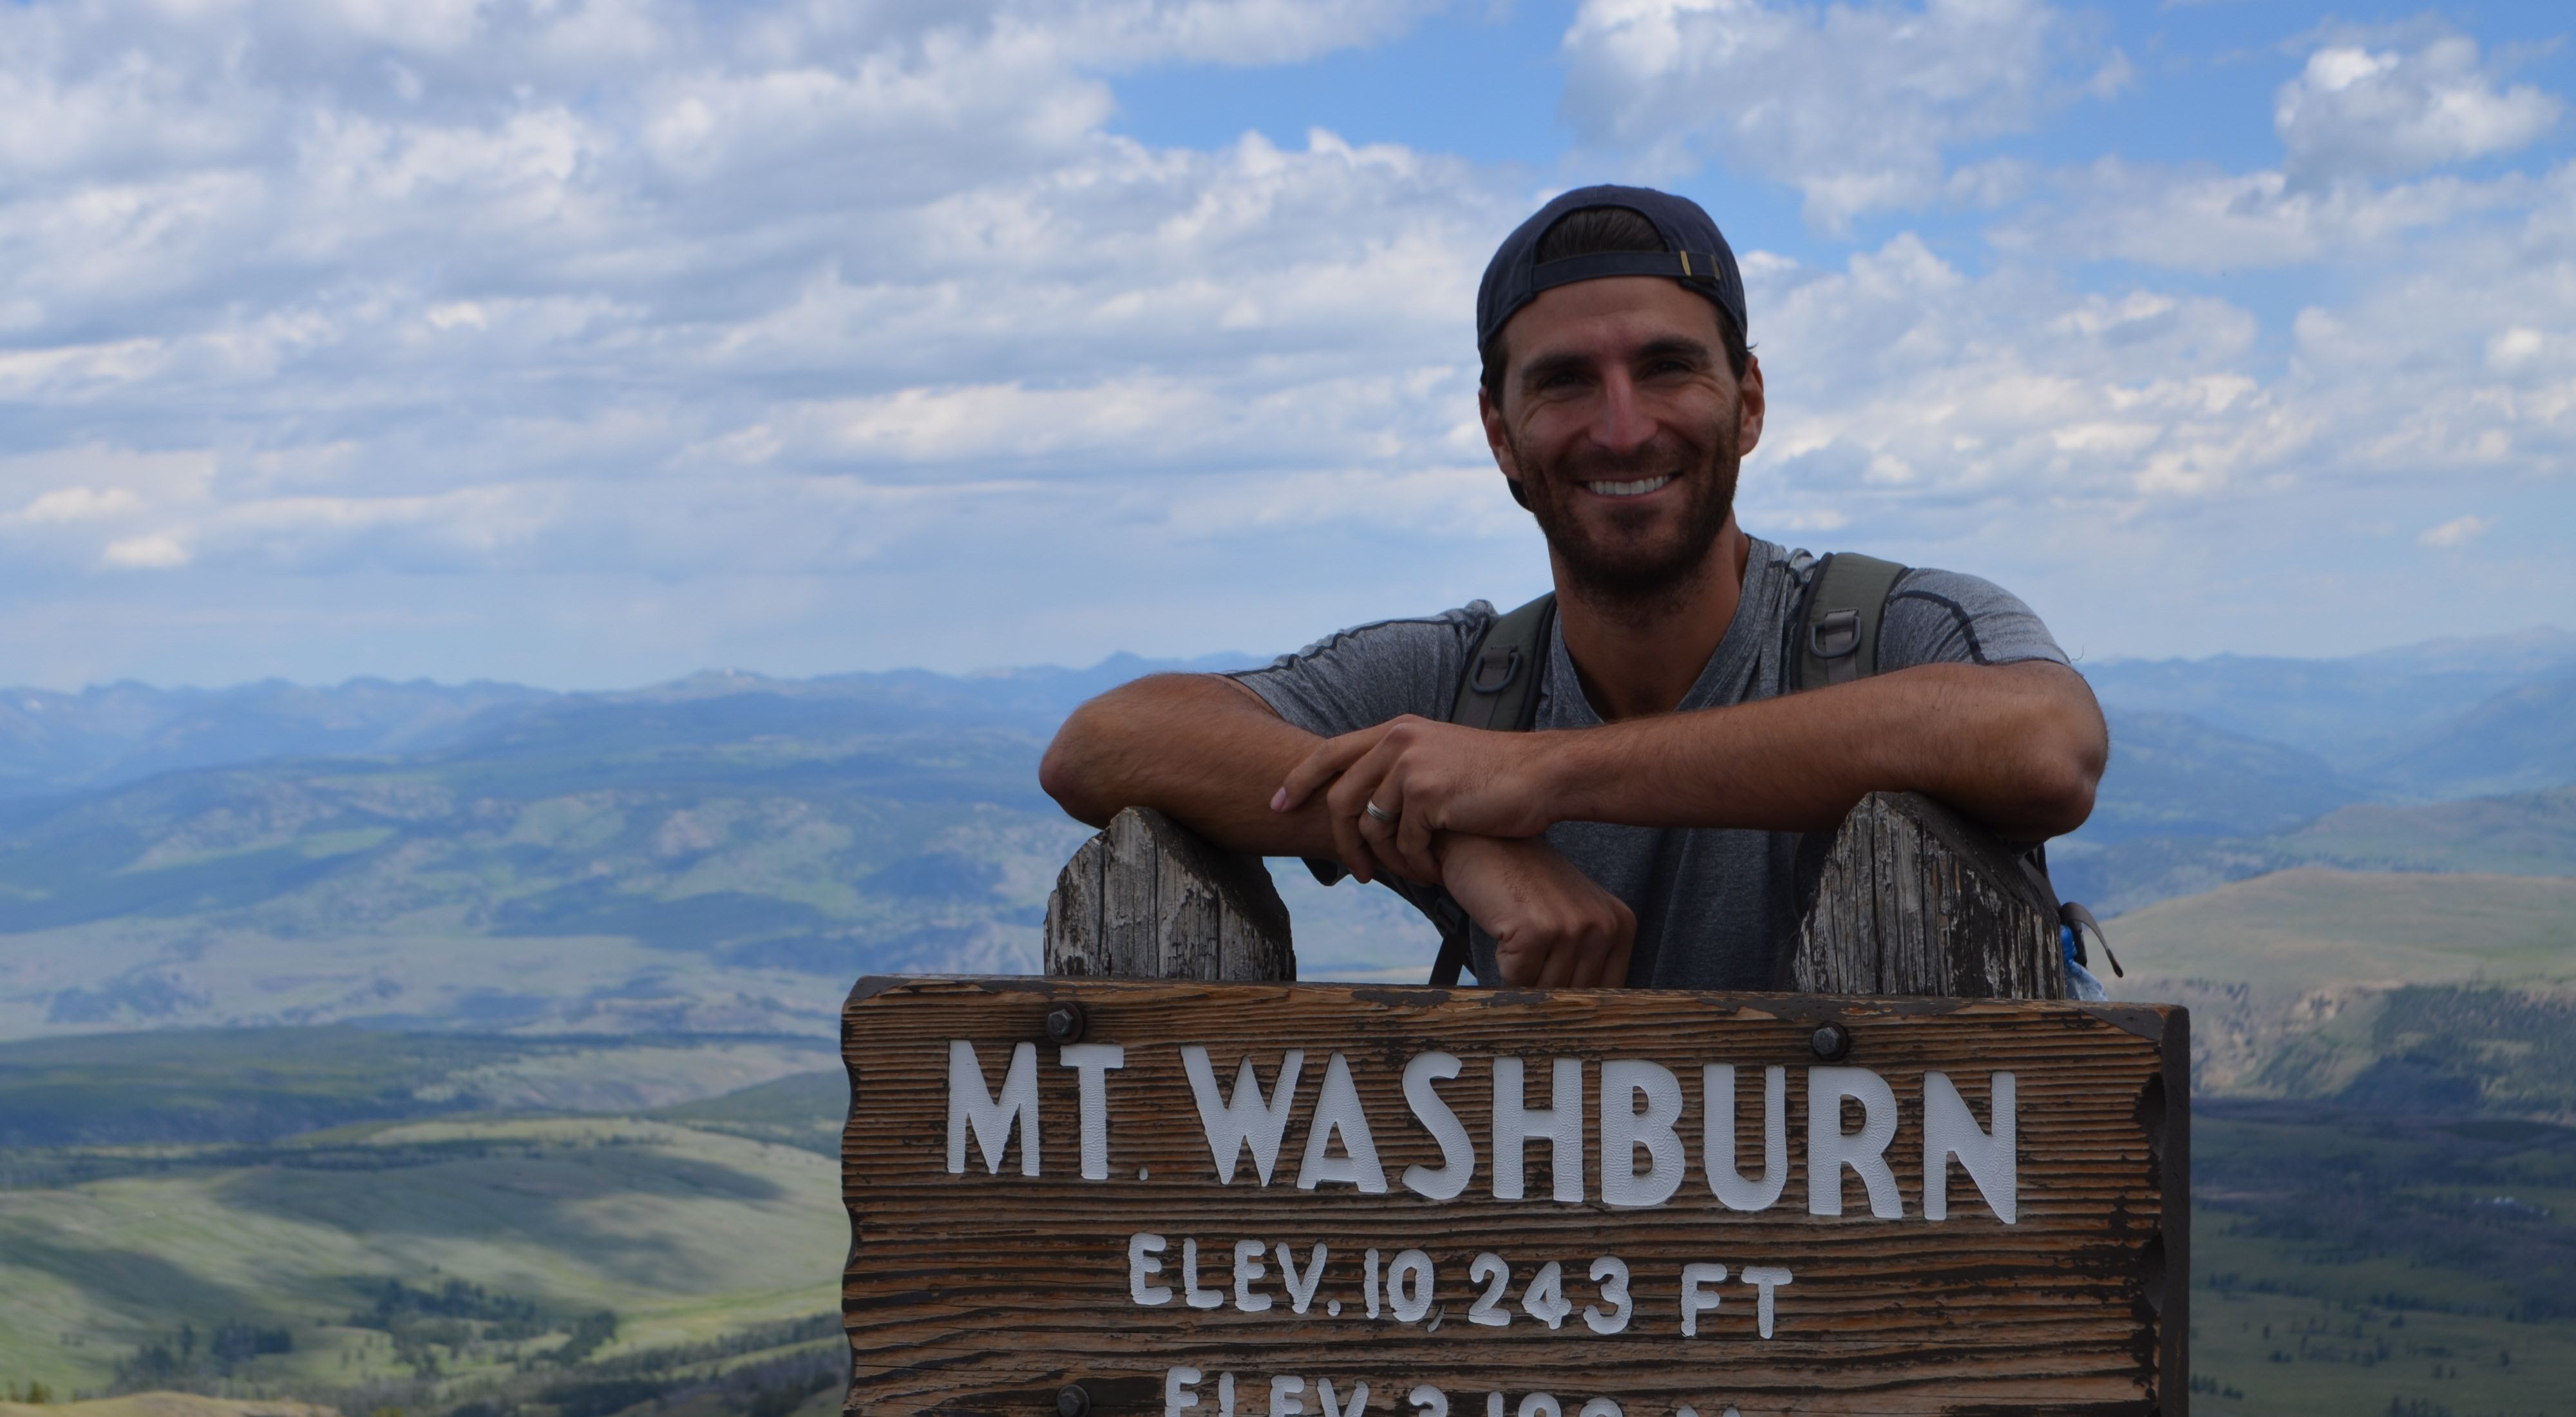 Eric Fisher, chief meteorologist at WBZ TV in Boston, enjoys spending time outdoors. Pictured here at Mount Washburn in Yellowstone National Park.